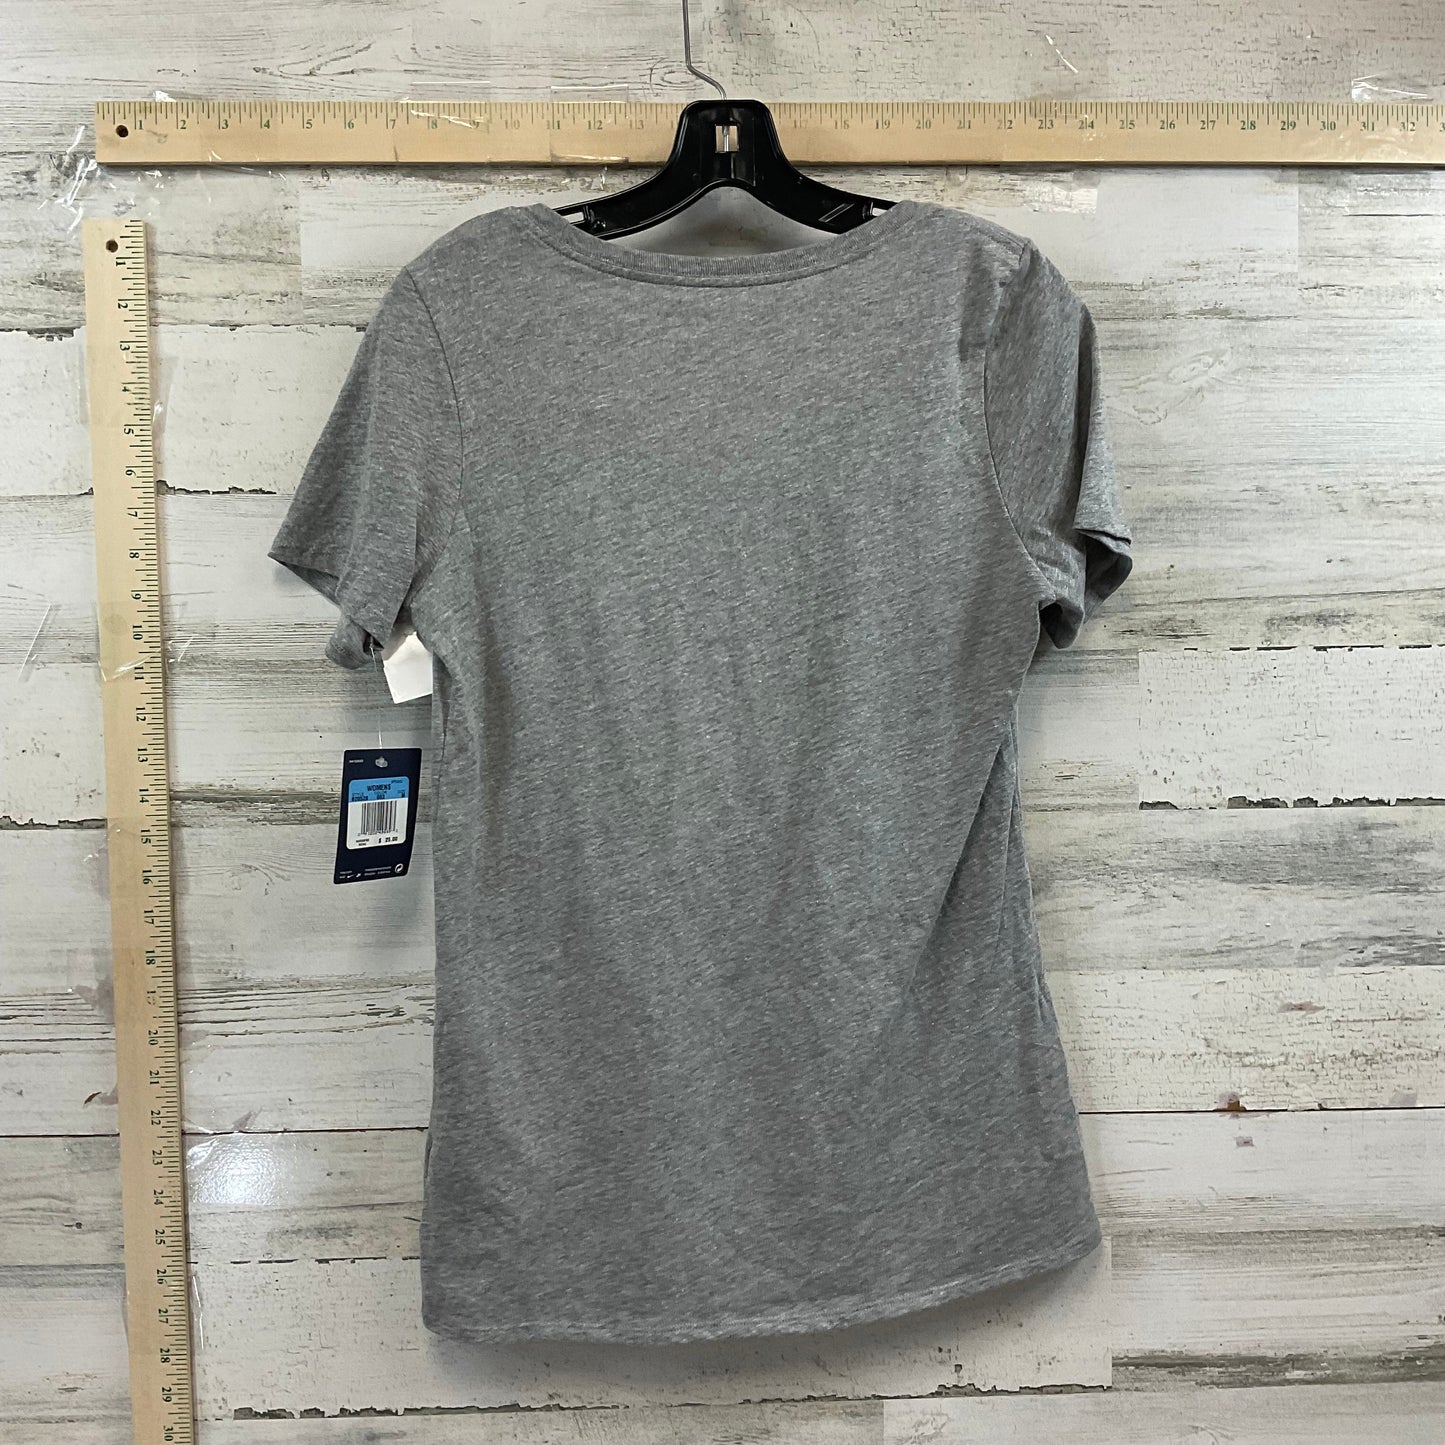 Grey Athletic Top Short Sleeve Nike Apparel, Size M